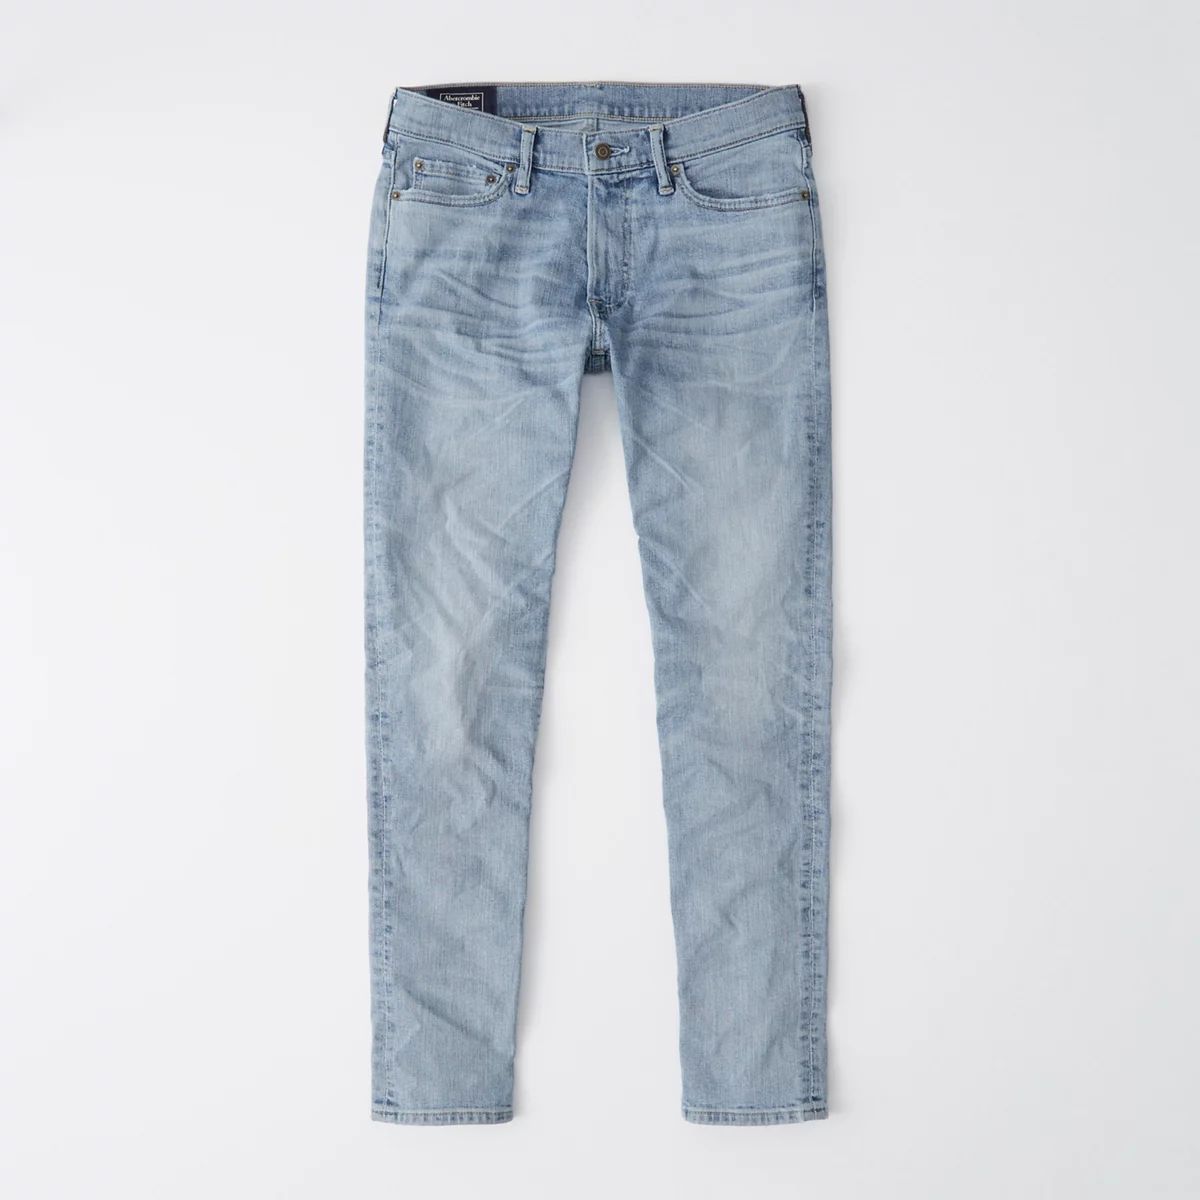 Skinny Jeans | Abercrombie & Fitch US & UK